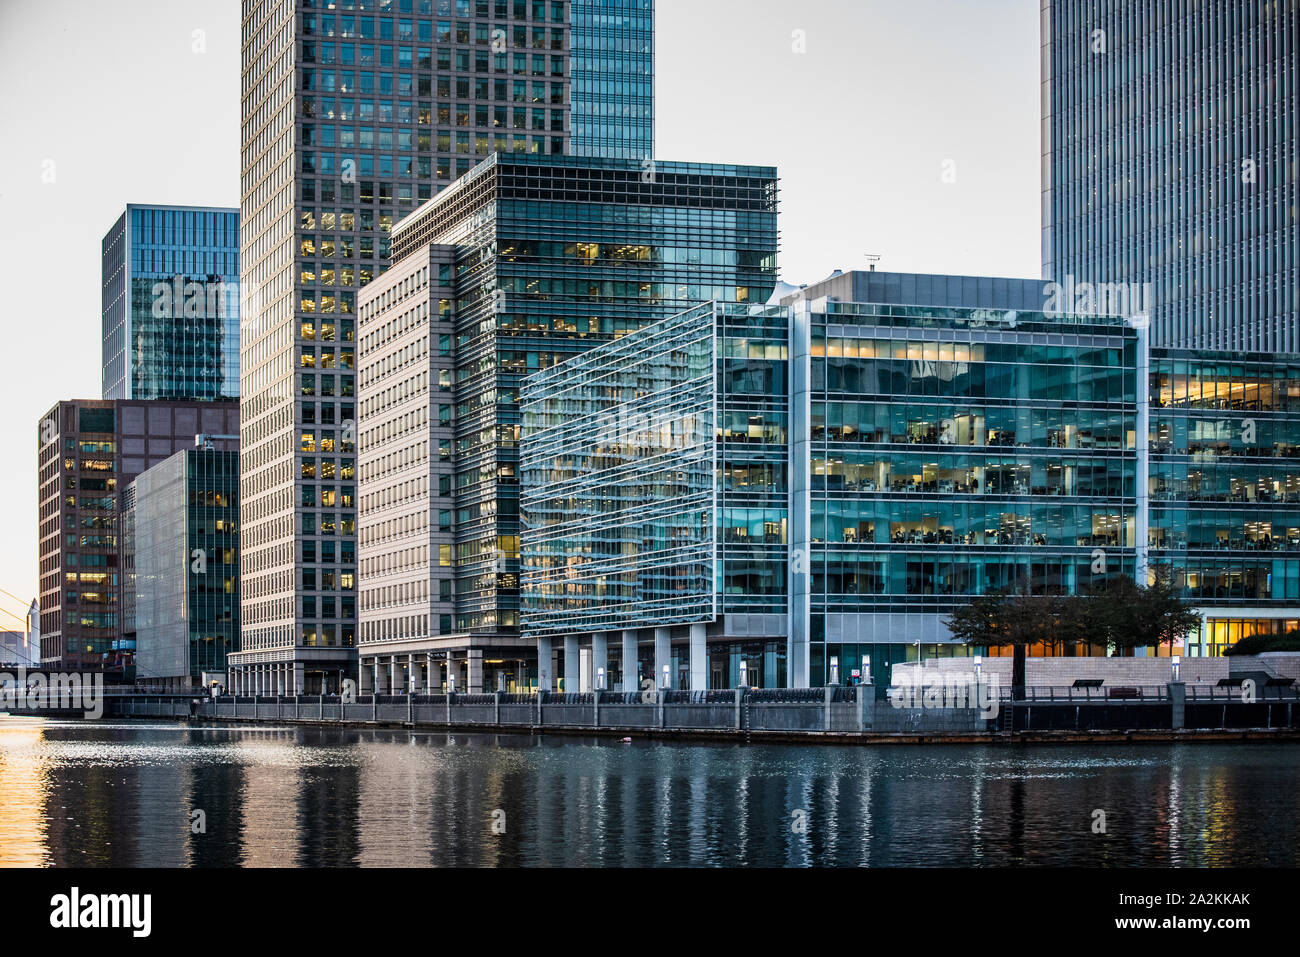 Clifford Chance London Canary Wharf London - South Dock - waterside buildings Canary Wharf South Dock quayside. Clifford Chance law firm in foreground Stock Photo